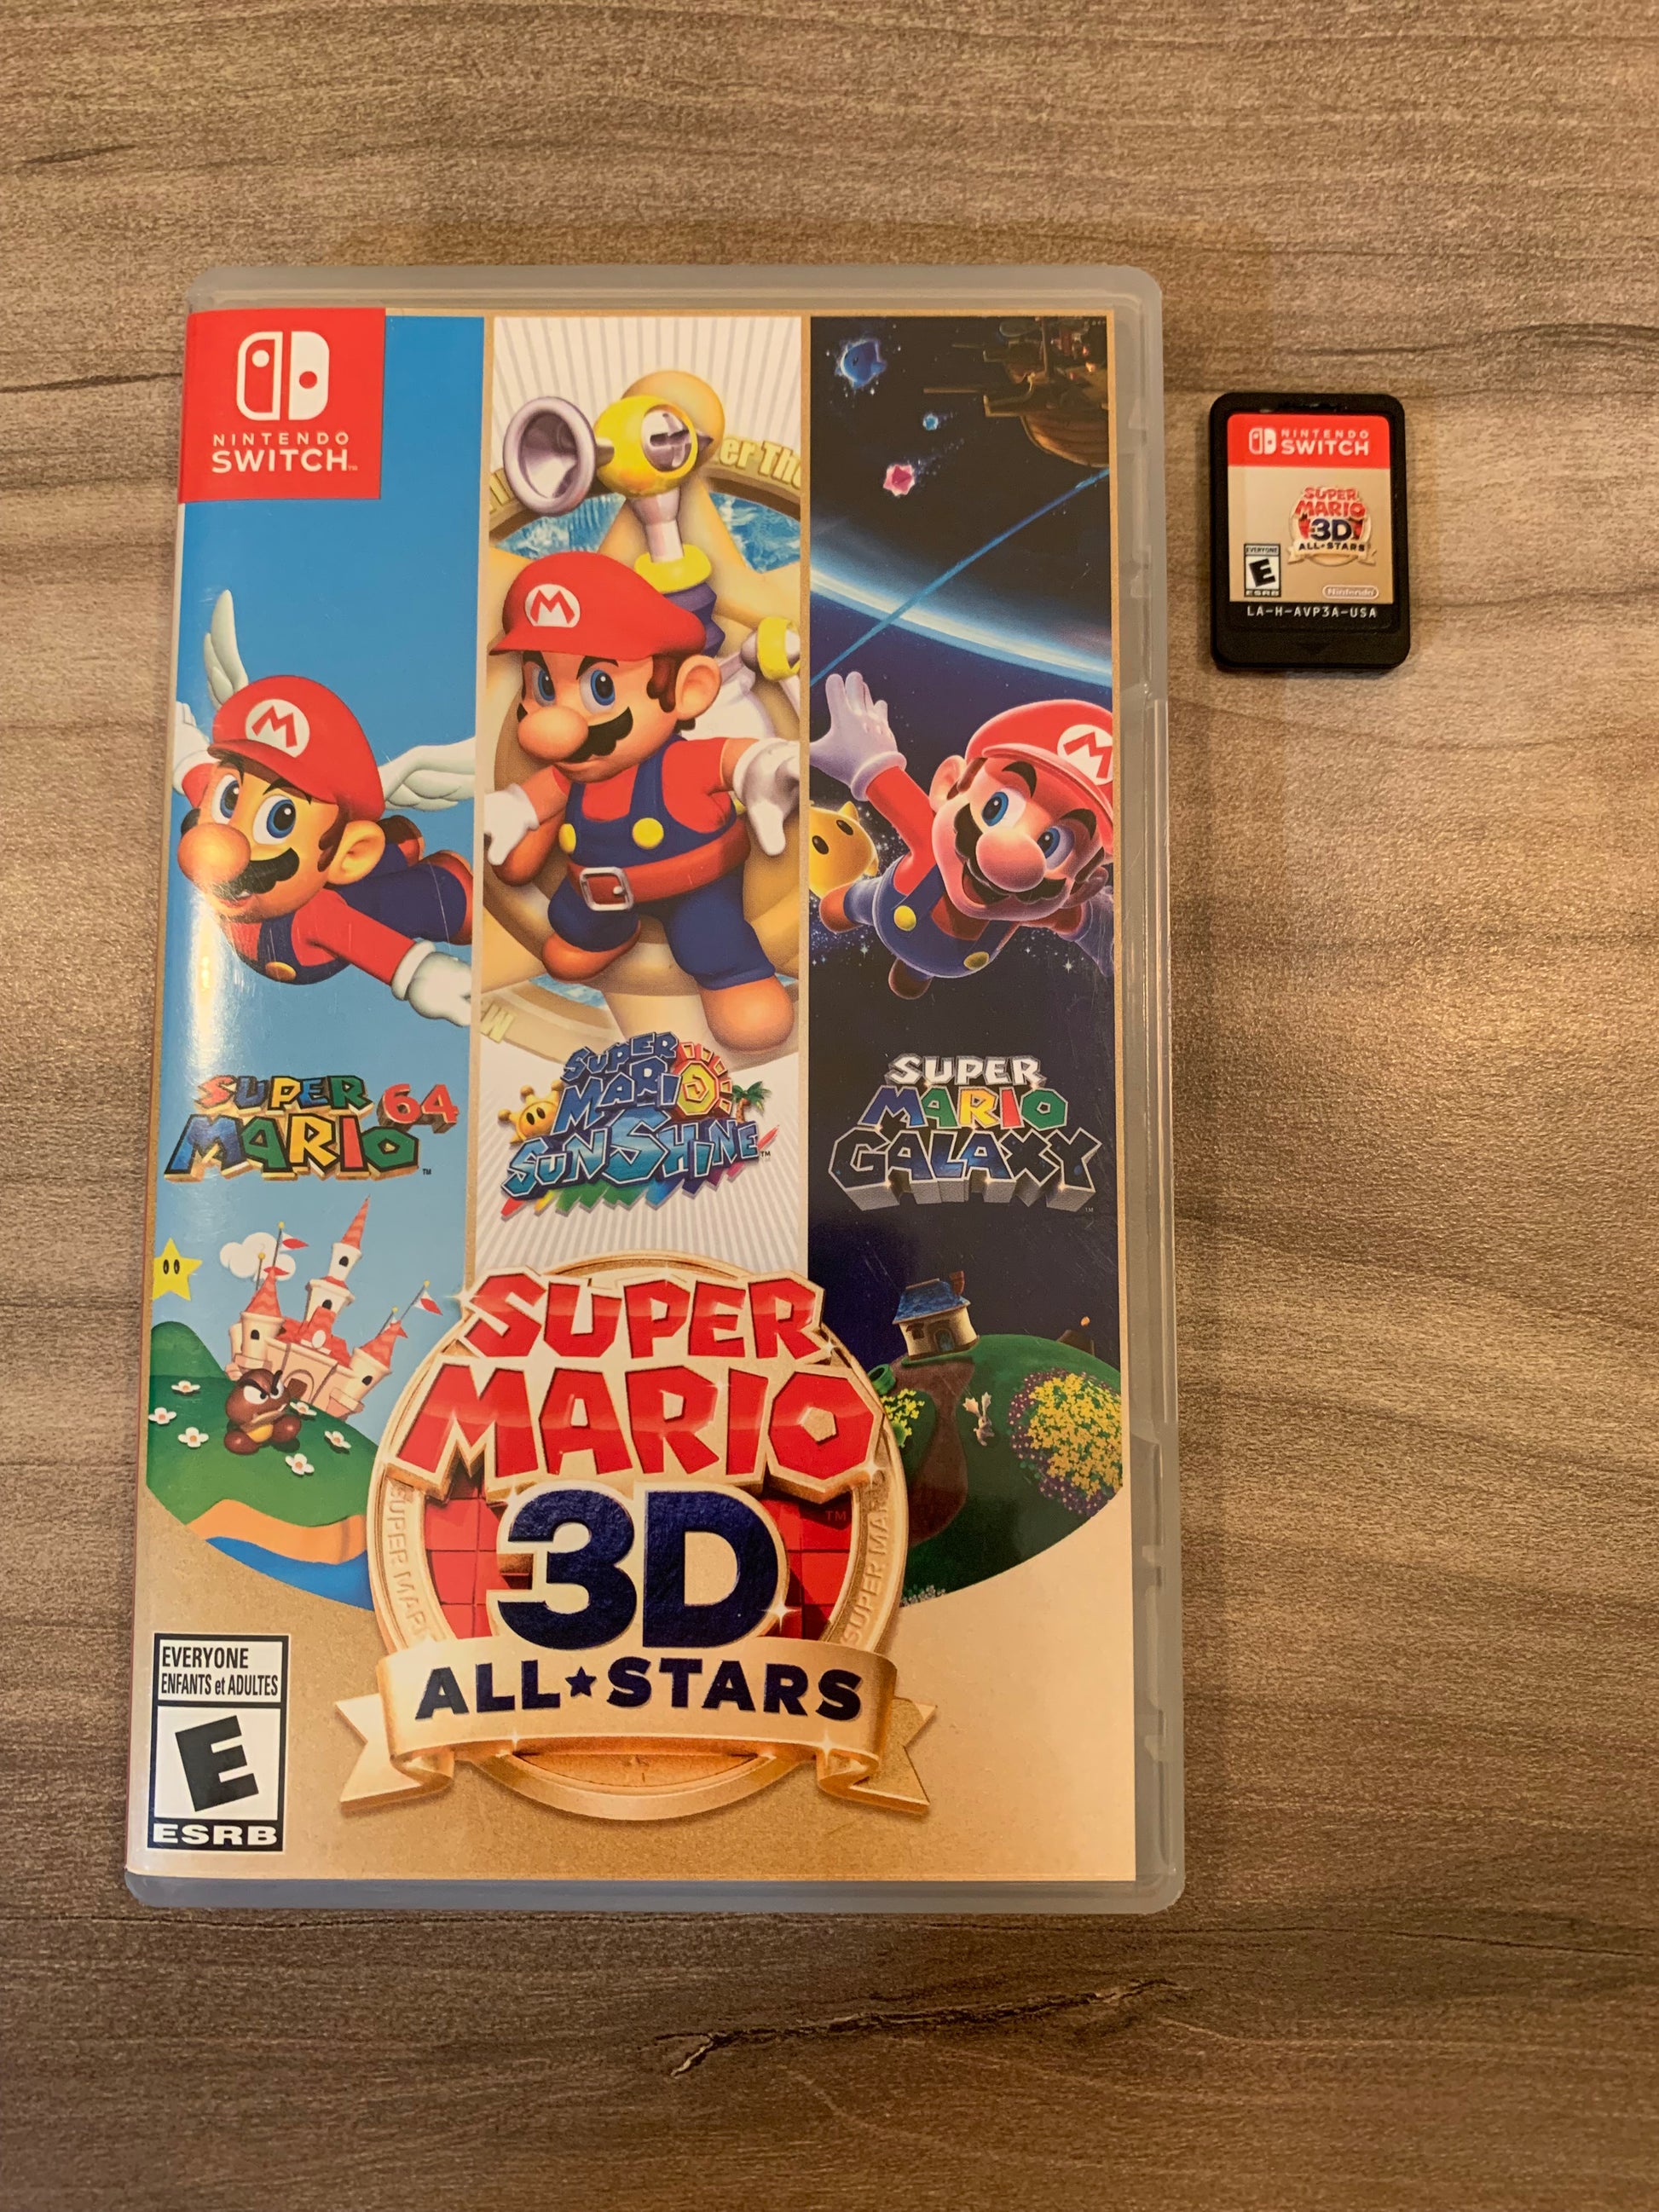 PiXEL-RETRO.COM : NINTENDO SWITCH NEW SEALED IN BOX COMPLETE MANUAL GAME NTSC SUPER MARIO 3D ALL-STARS